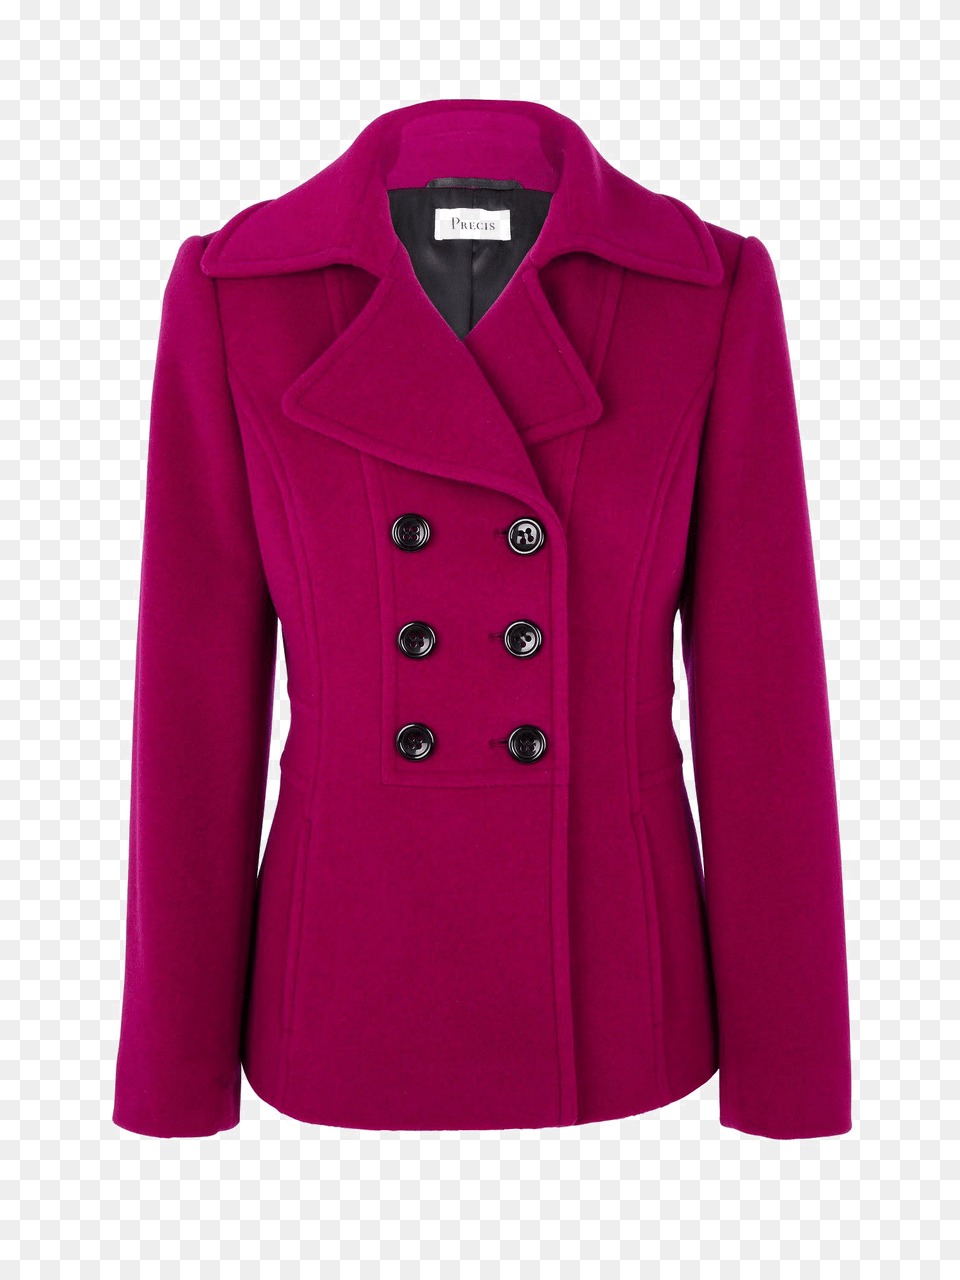 Short Coat For Women Image With Transparent Background Vector, Blazer, Clothing, Jacket, Overcoat Free Png